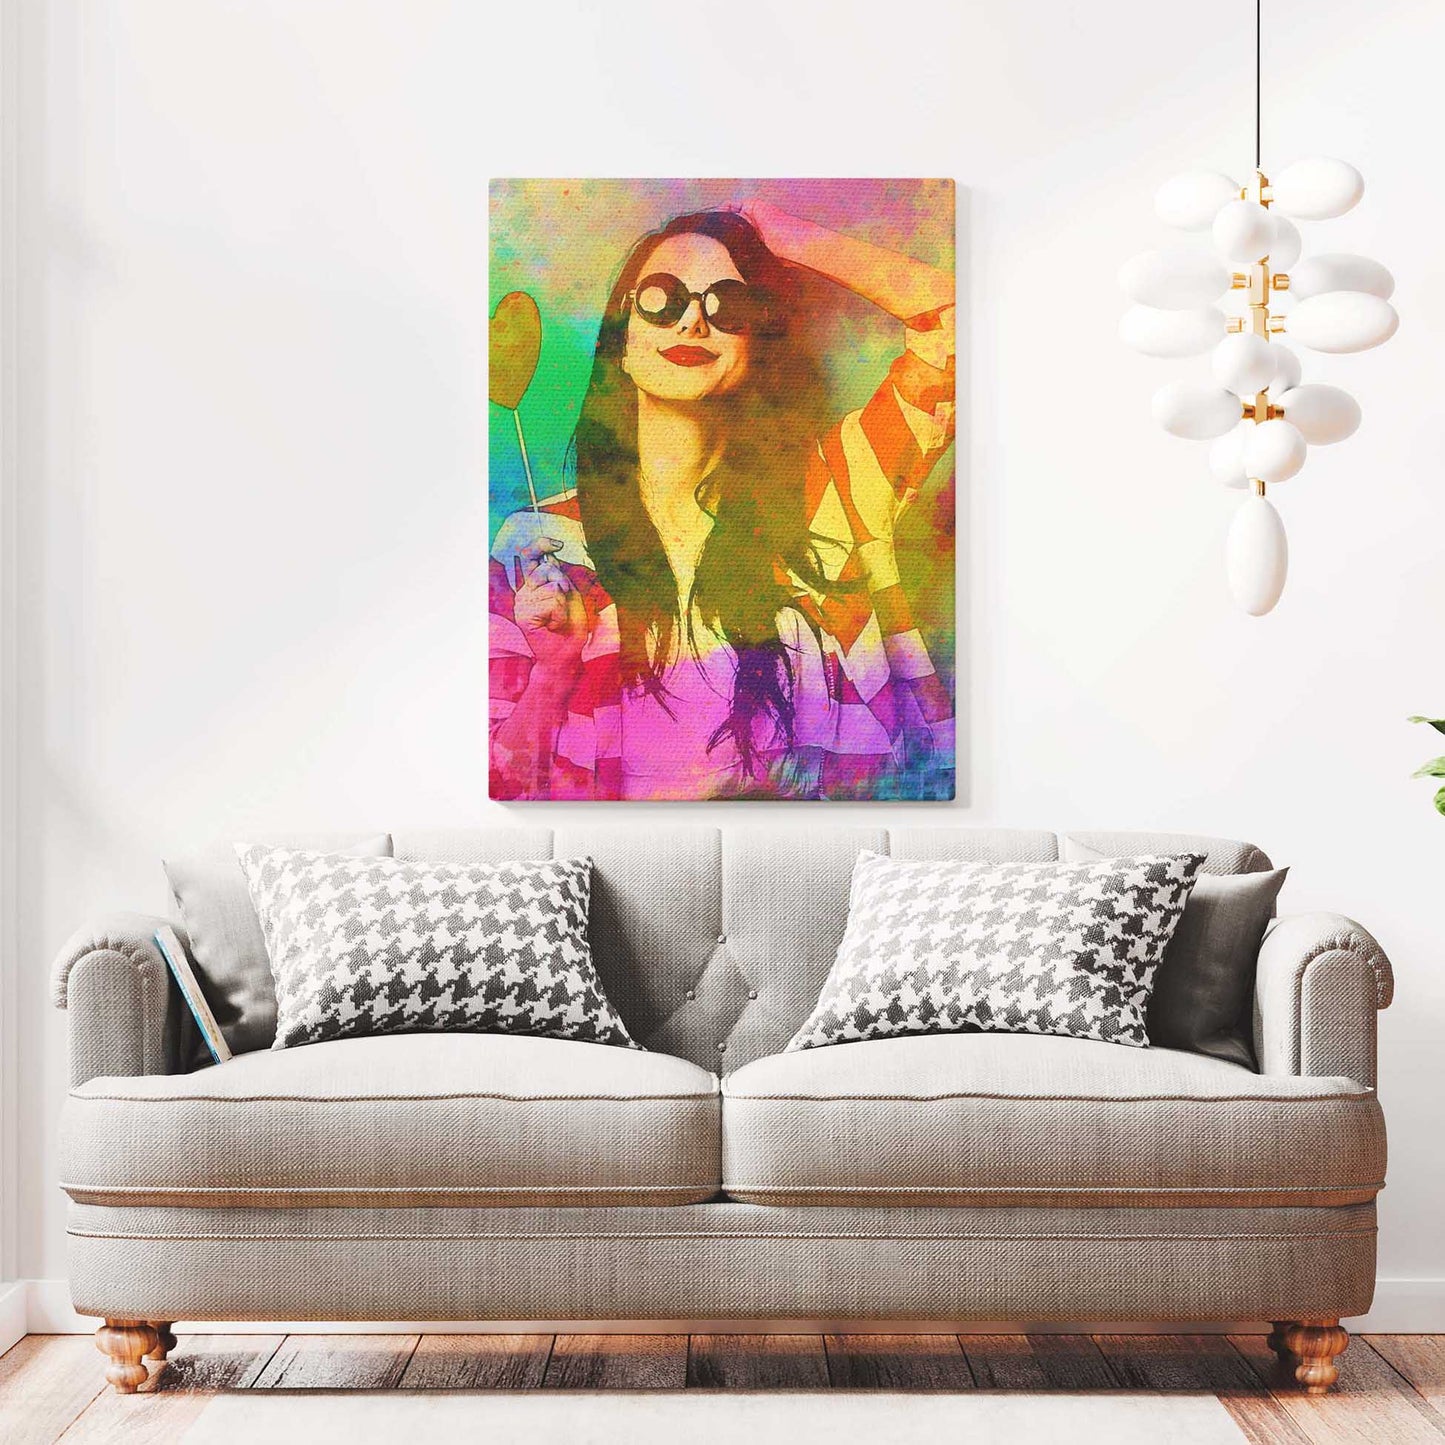 Personalised Splash of Colours Canvas is a feast for the eyes and a celebration of creativity. This artwork, created through a combination of painting from photo and digital art, showcases a harmonious blend of vibrant colors